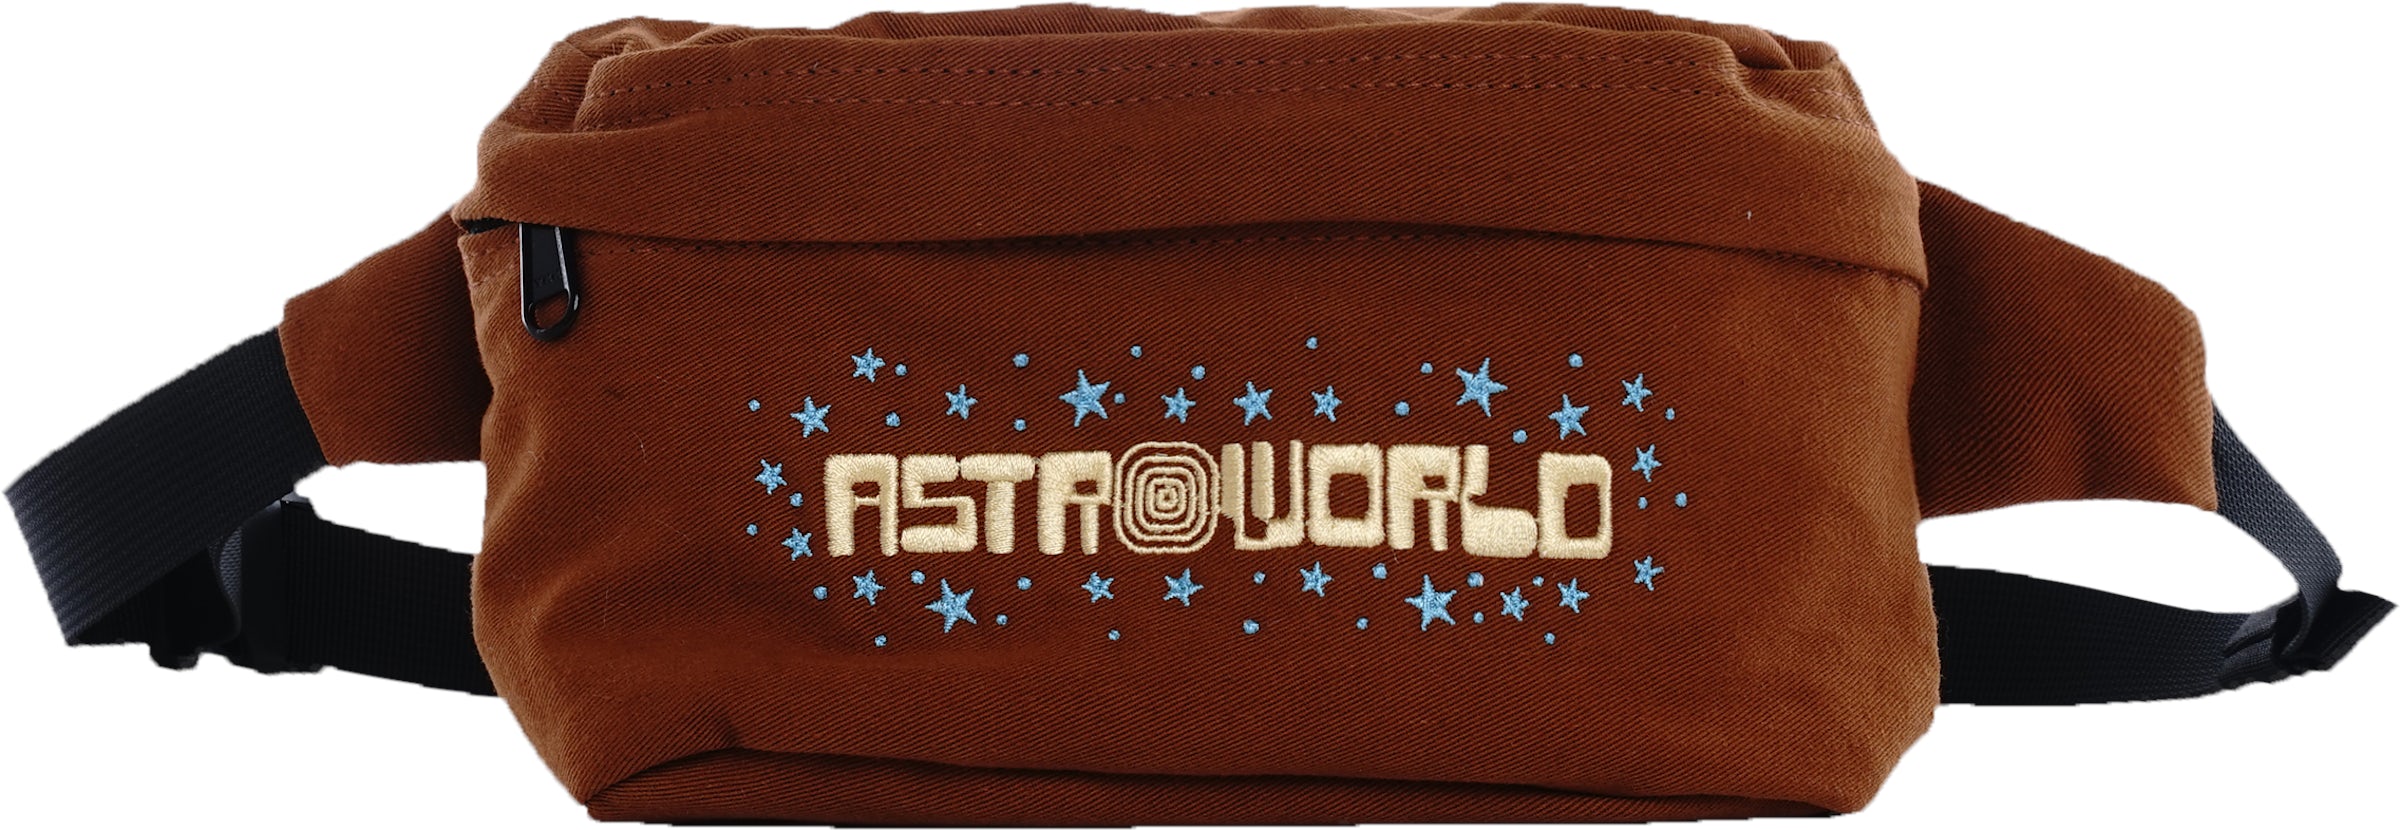 CACTUS JACK BACKPACK WITH PATCH SET OFFICIAL MERCH Astroworld Travis Scott